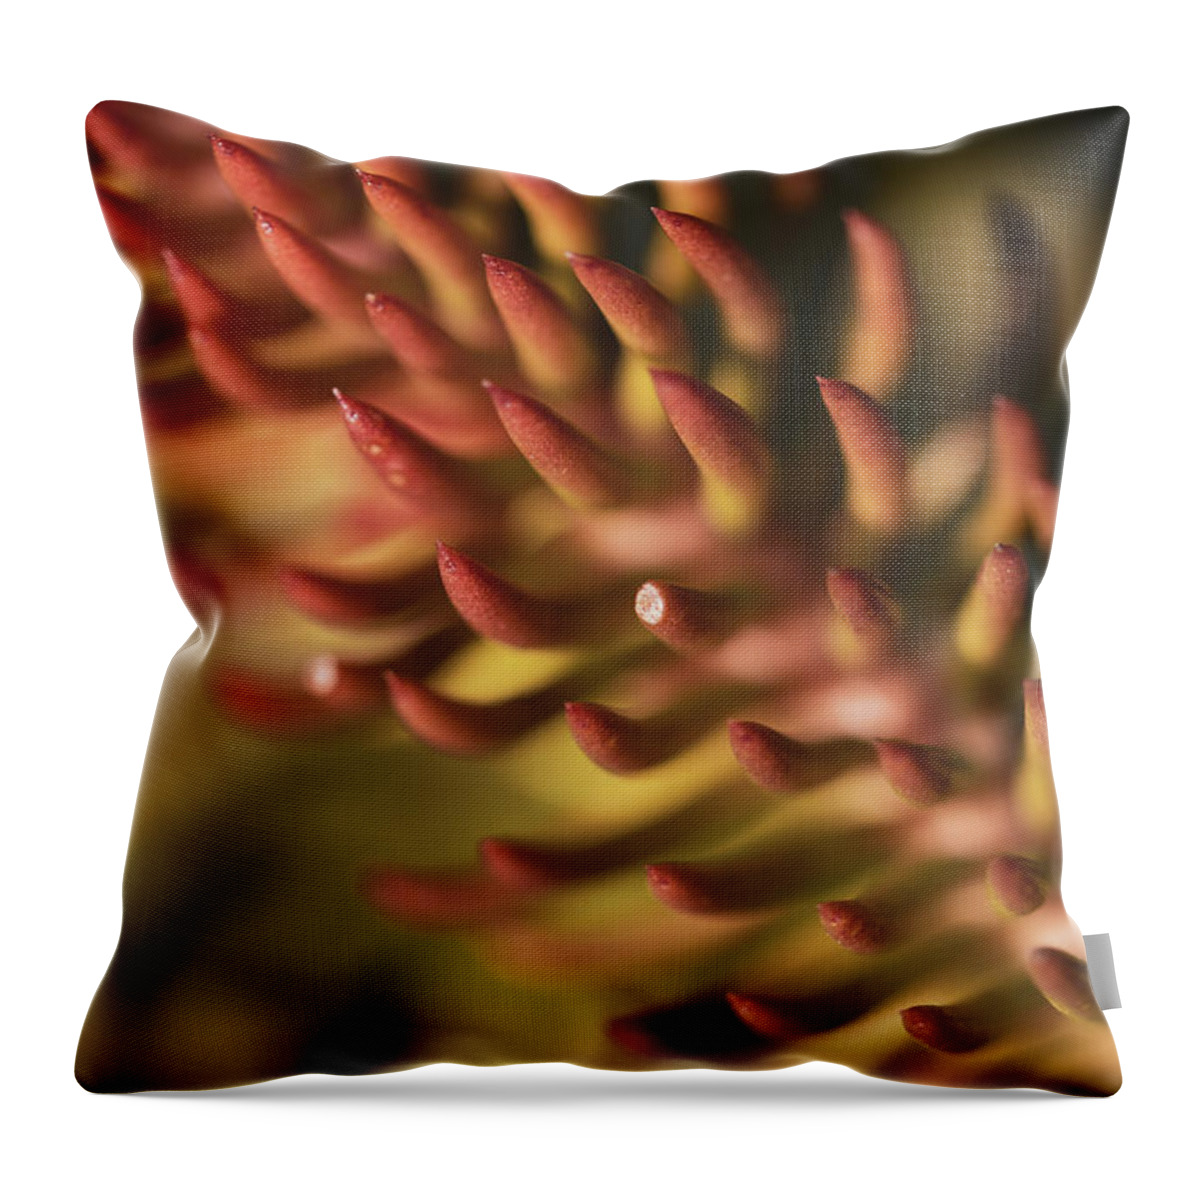 Macro Throw Pillow featuring the photograph Close-up Nature by Martin Vorel Minimalist Photography